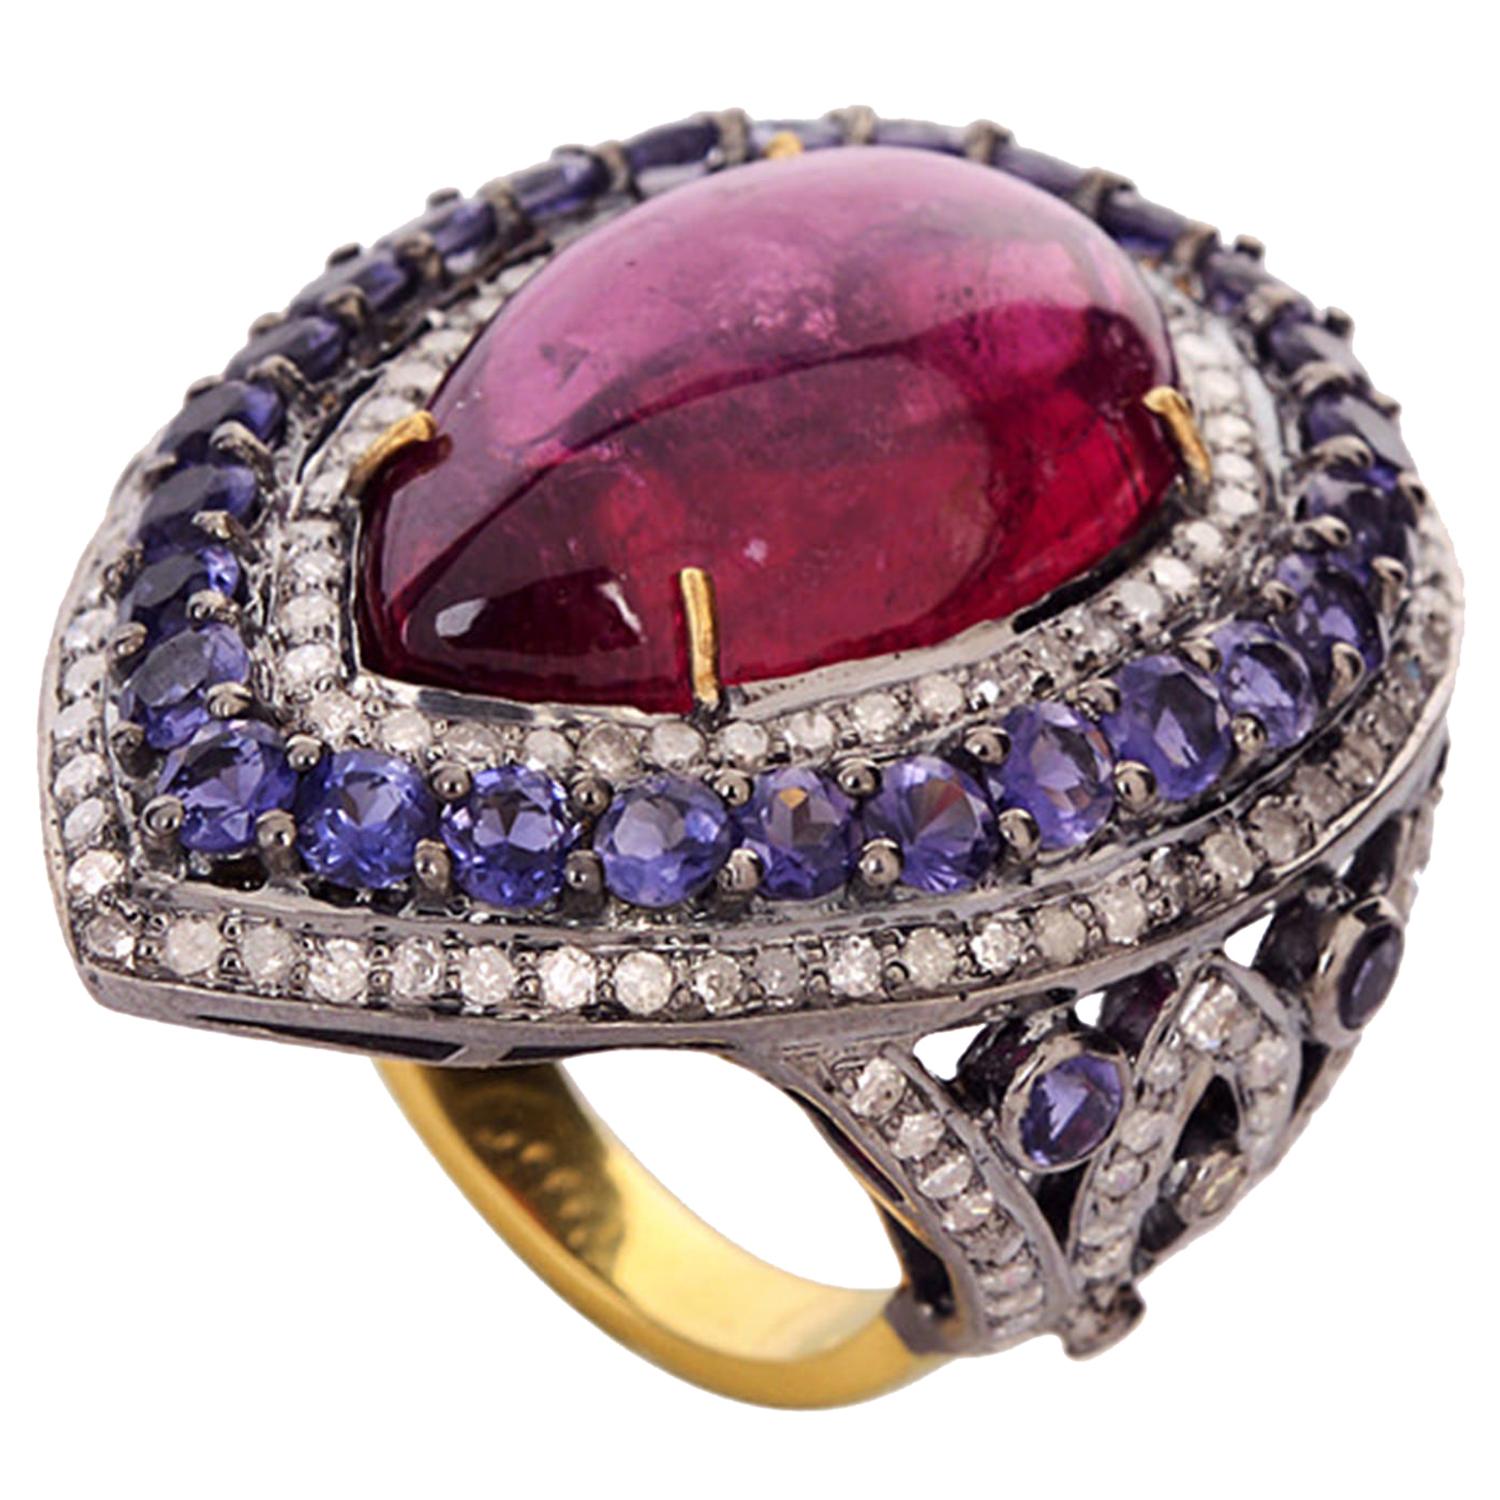 Red Tourmaline Diamond Iolite Ring in 18k Gold and Silver